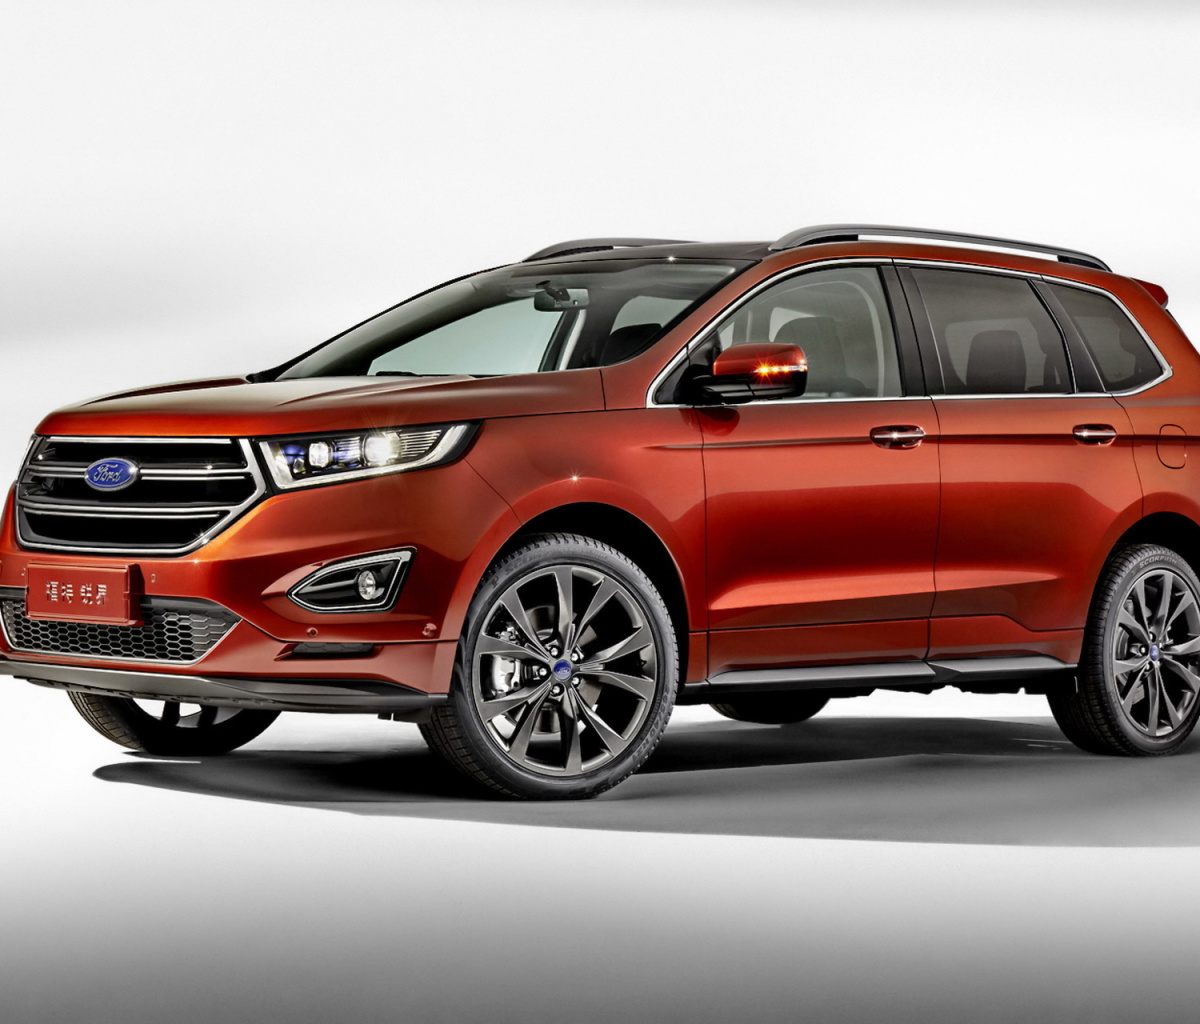 2014 Ford Edge Crossover wallpaper 1200x1024